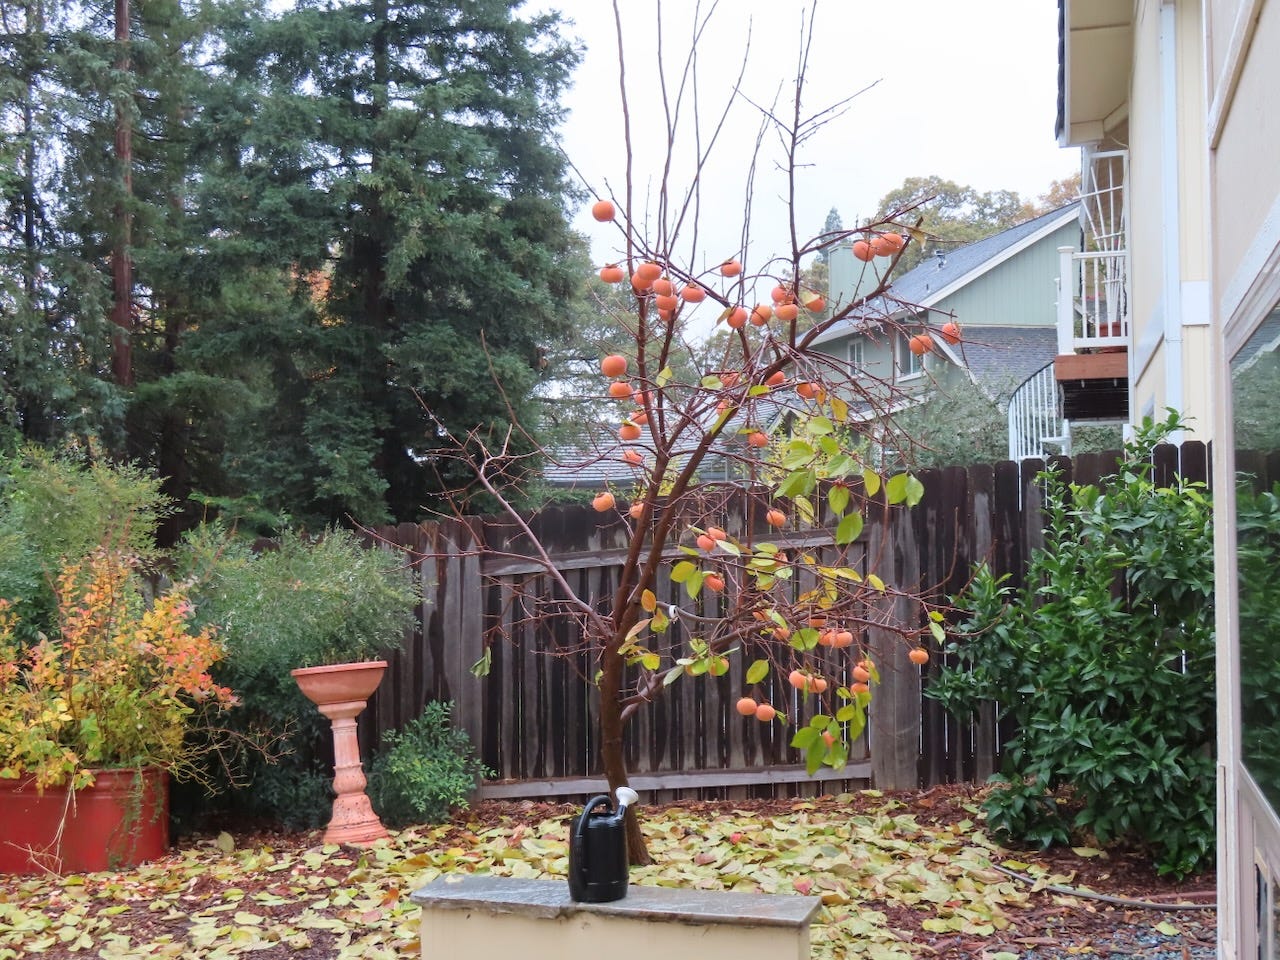 Persimmon tree without leaves